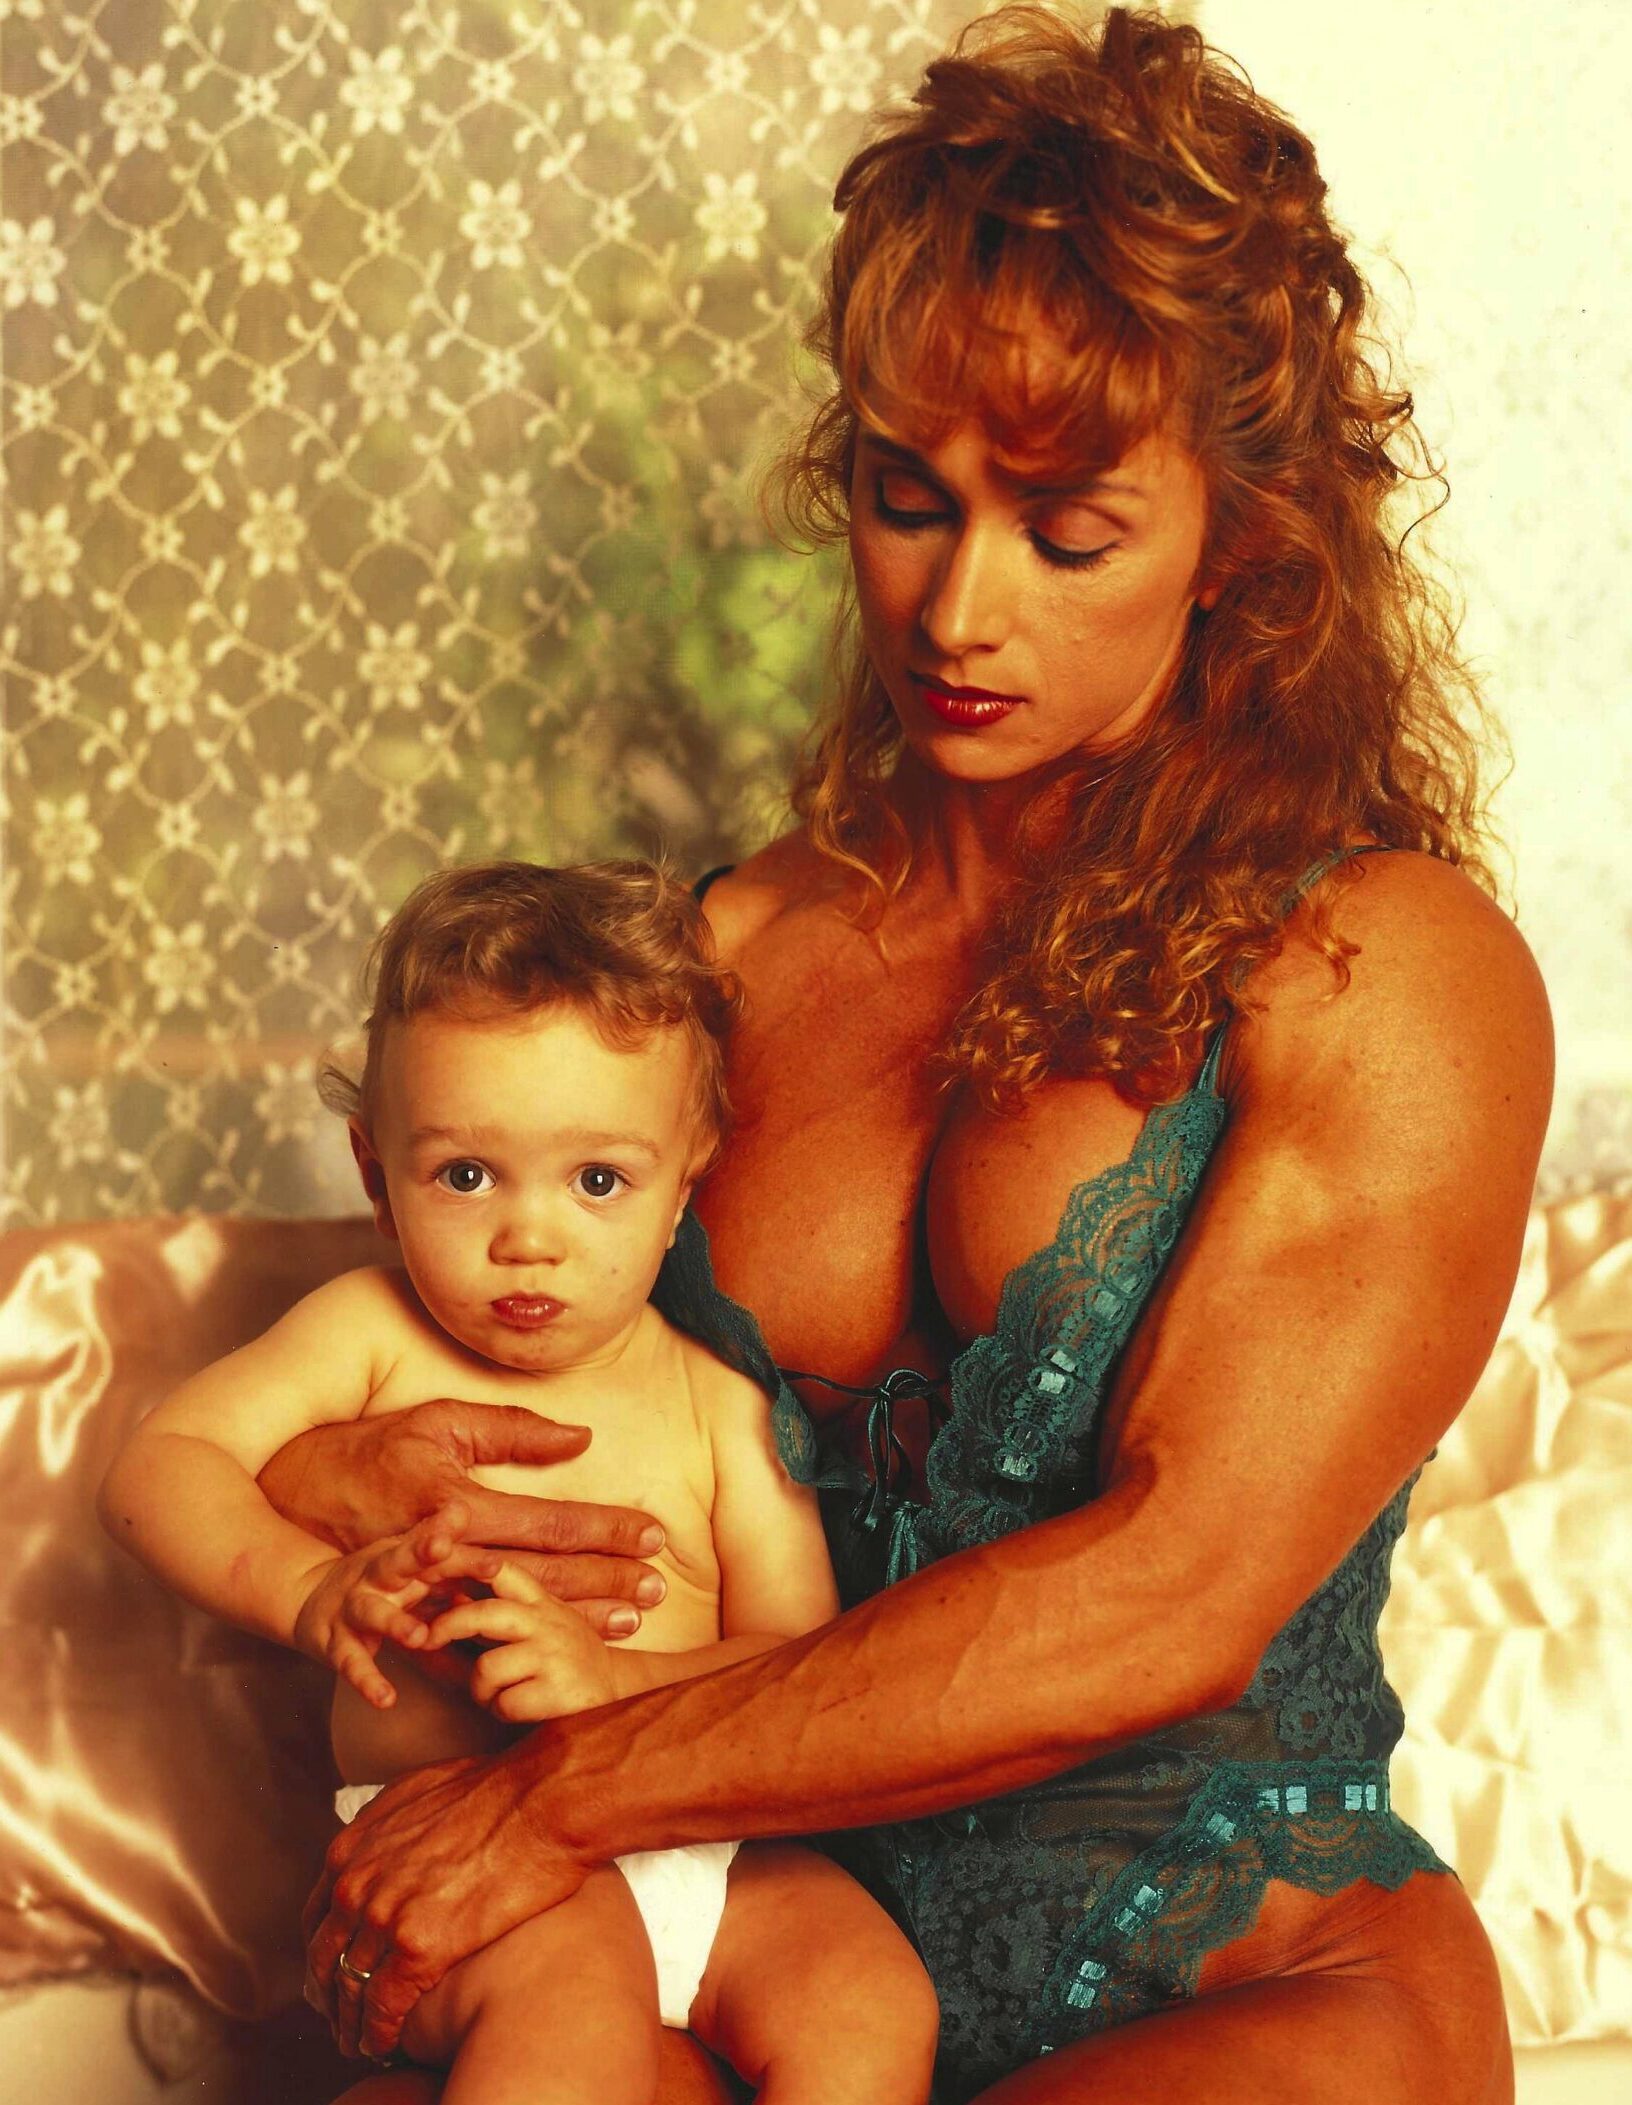 Debby McKnight IFBB Pro photo shoot with infant son